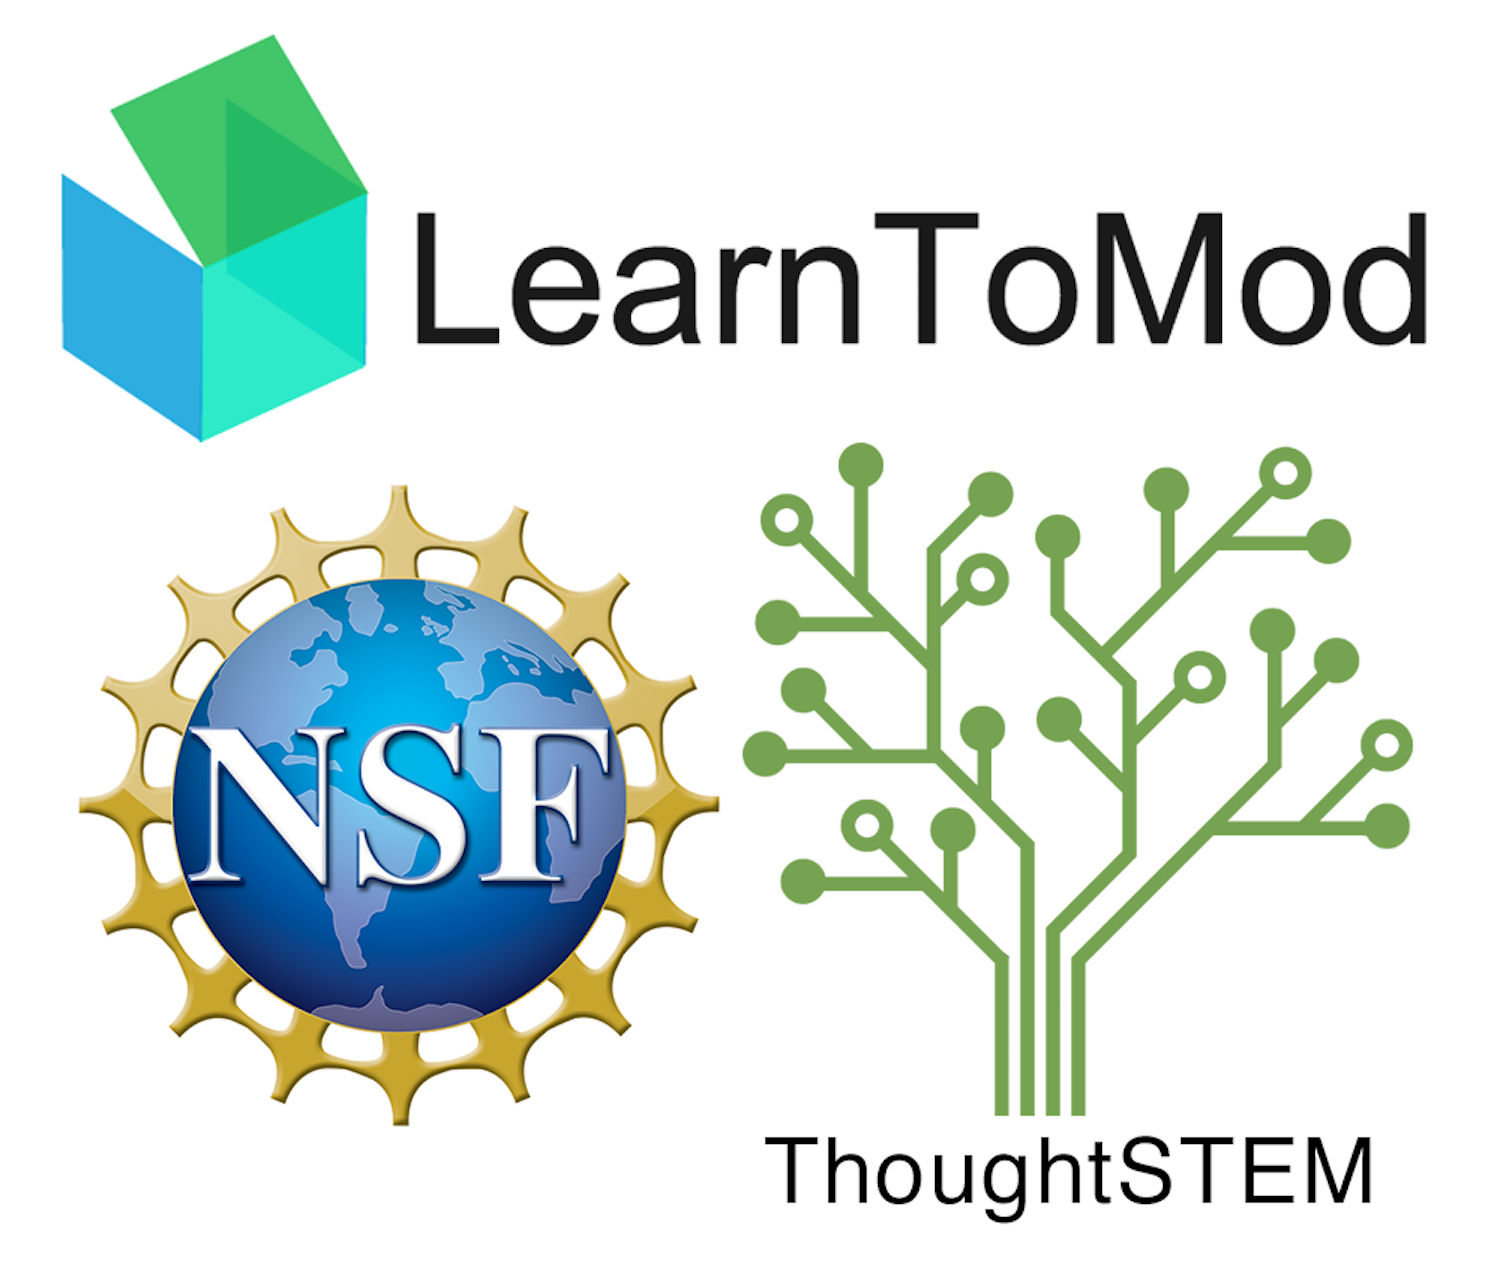 LearnToMod, ThoughtSTEM, and National Science Foundation Logos